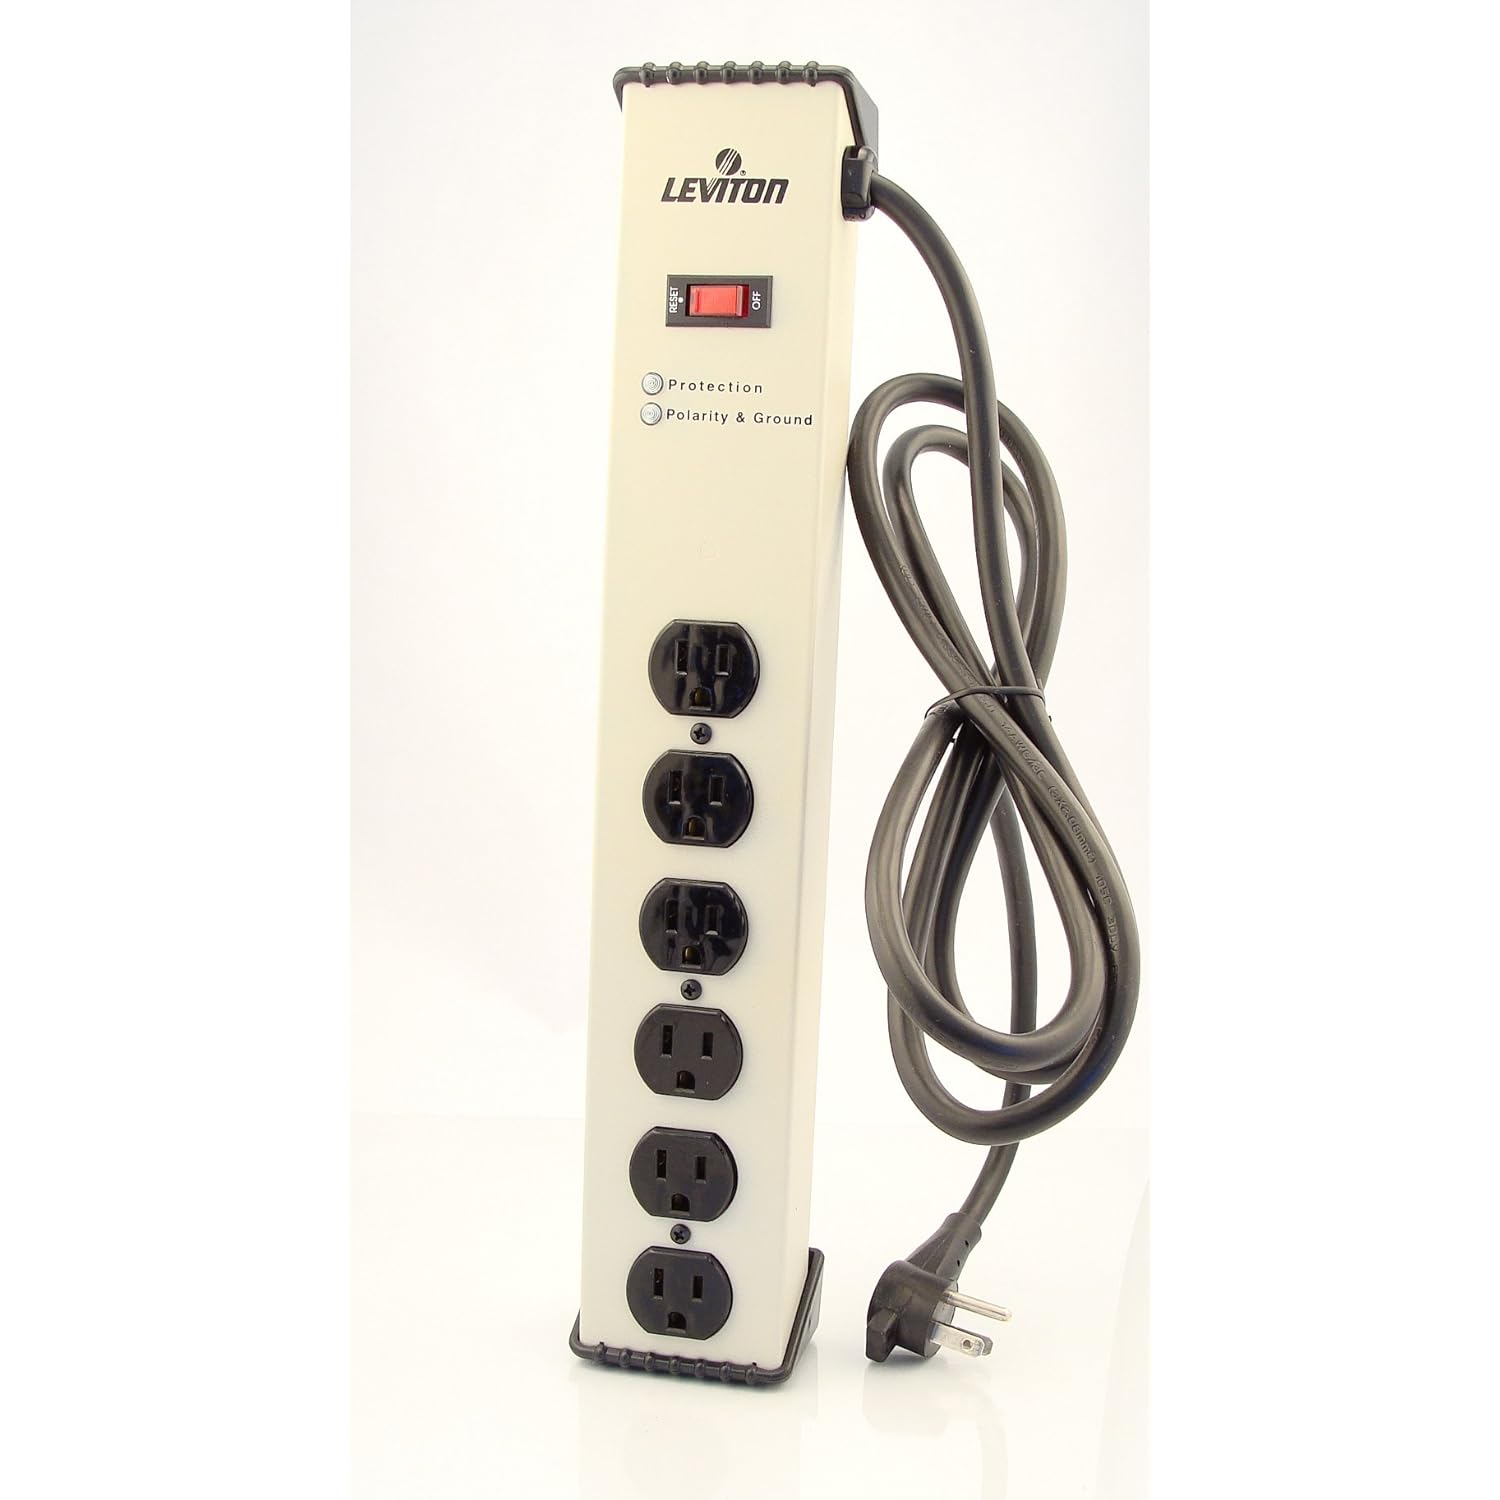 Leviton 5100-IPS 120 Volt, 15 Amp, Surge Protected, 6-Outlet Strip with Switch, Heavy Duty, 6-Ft, Beige